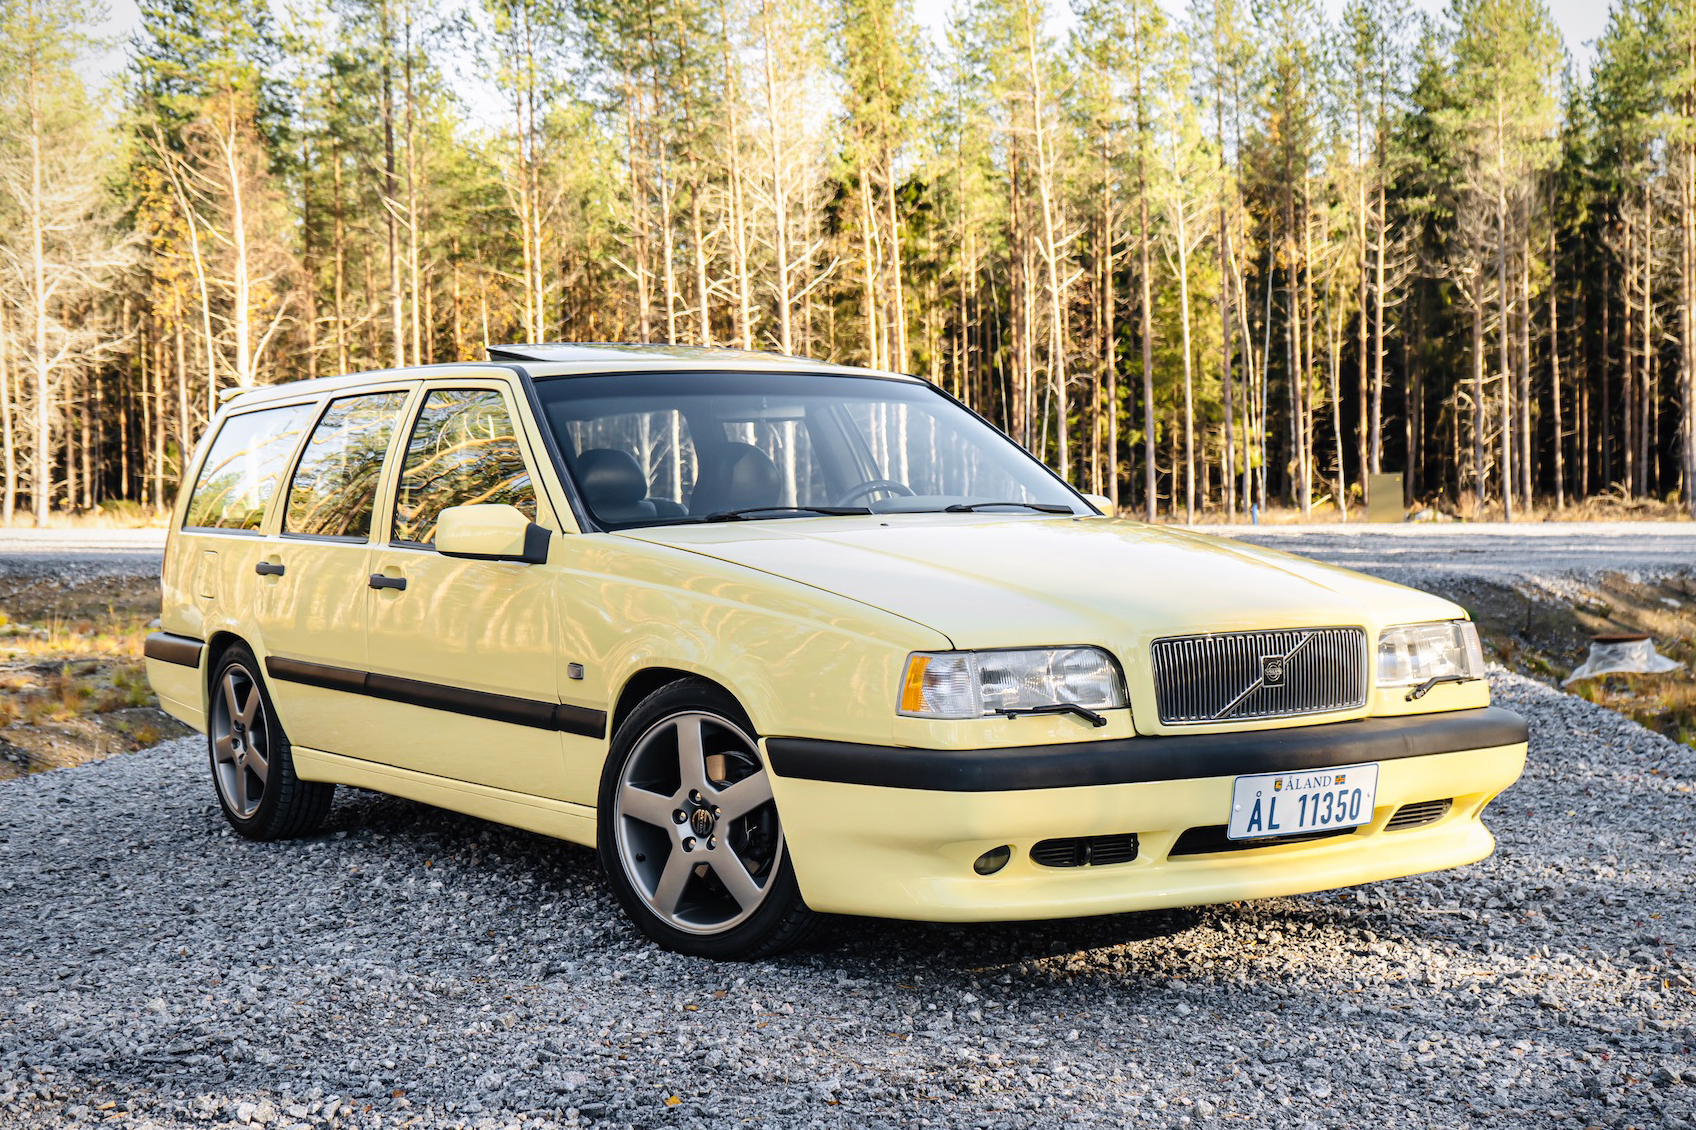 1995 VOLVO 850 T-5R for sale by auction in Nykarleby, Finland